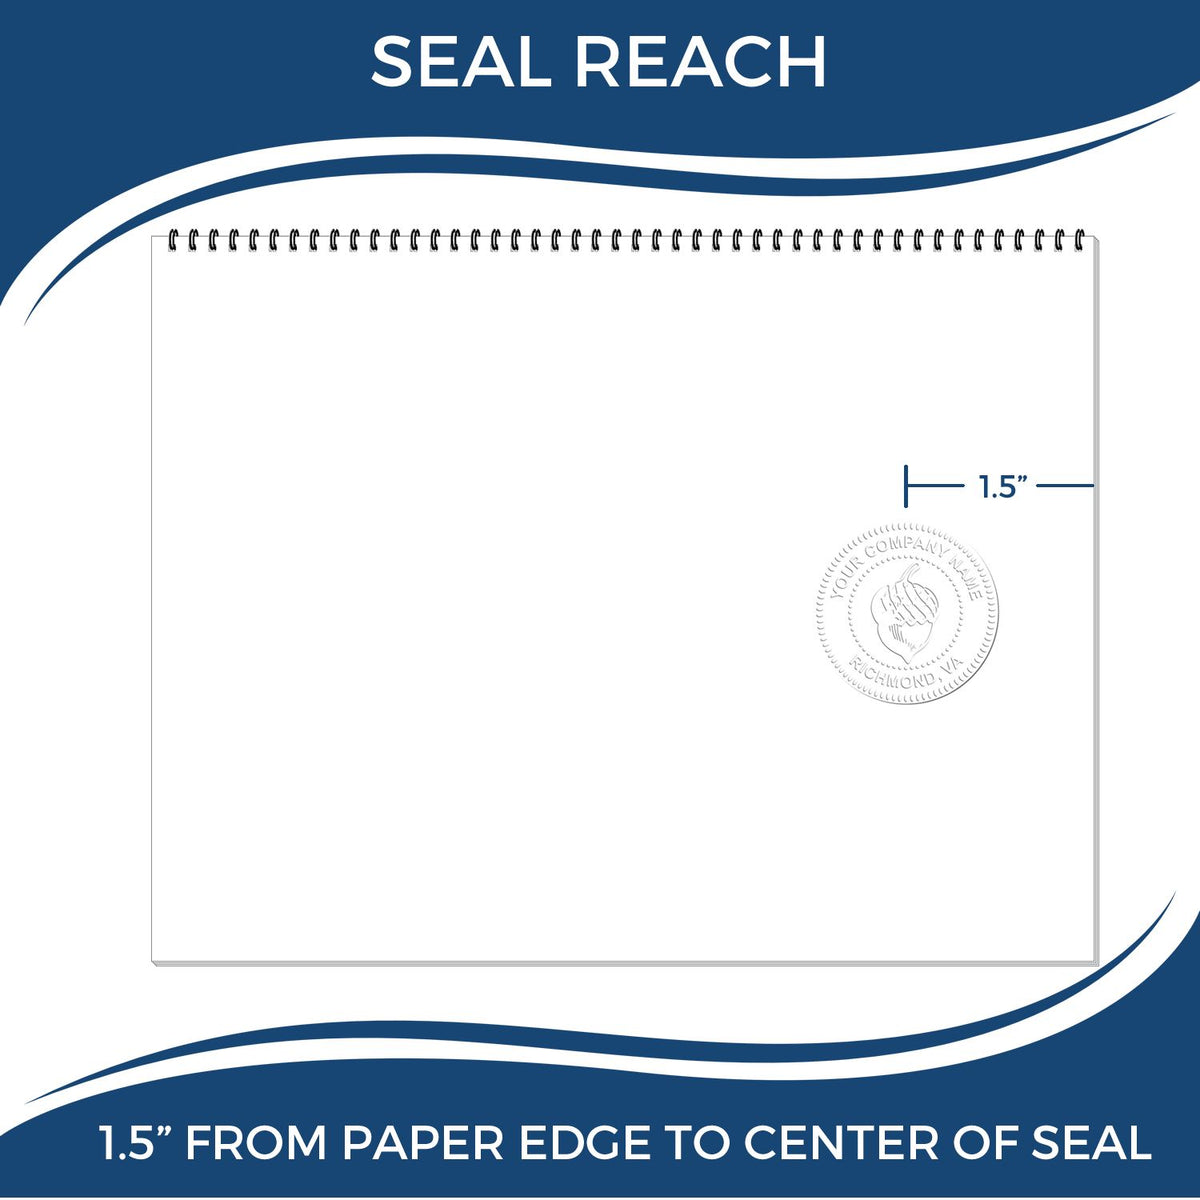 An infographic showing the seal reach which is represented by a ruler and a miniature seal image of the Hybrid New Hampshire Engineer Seal